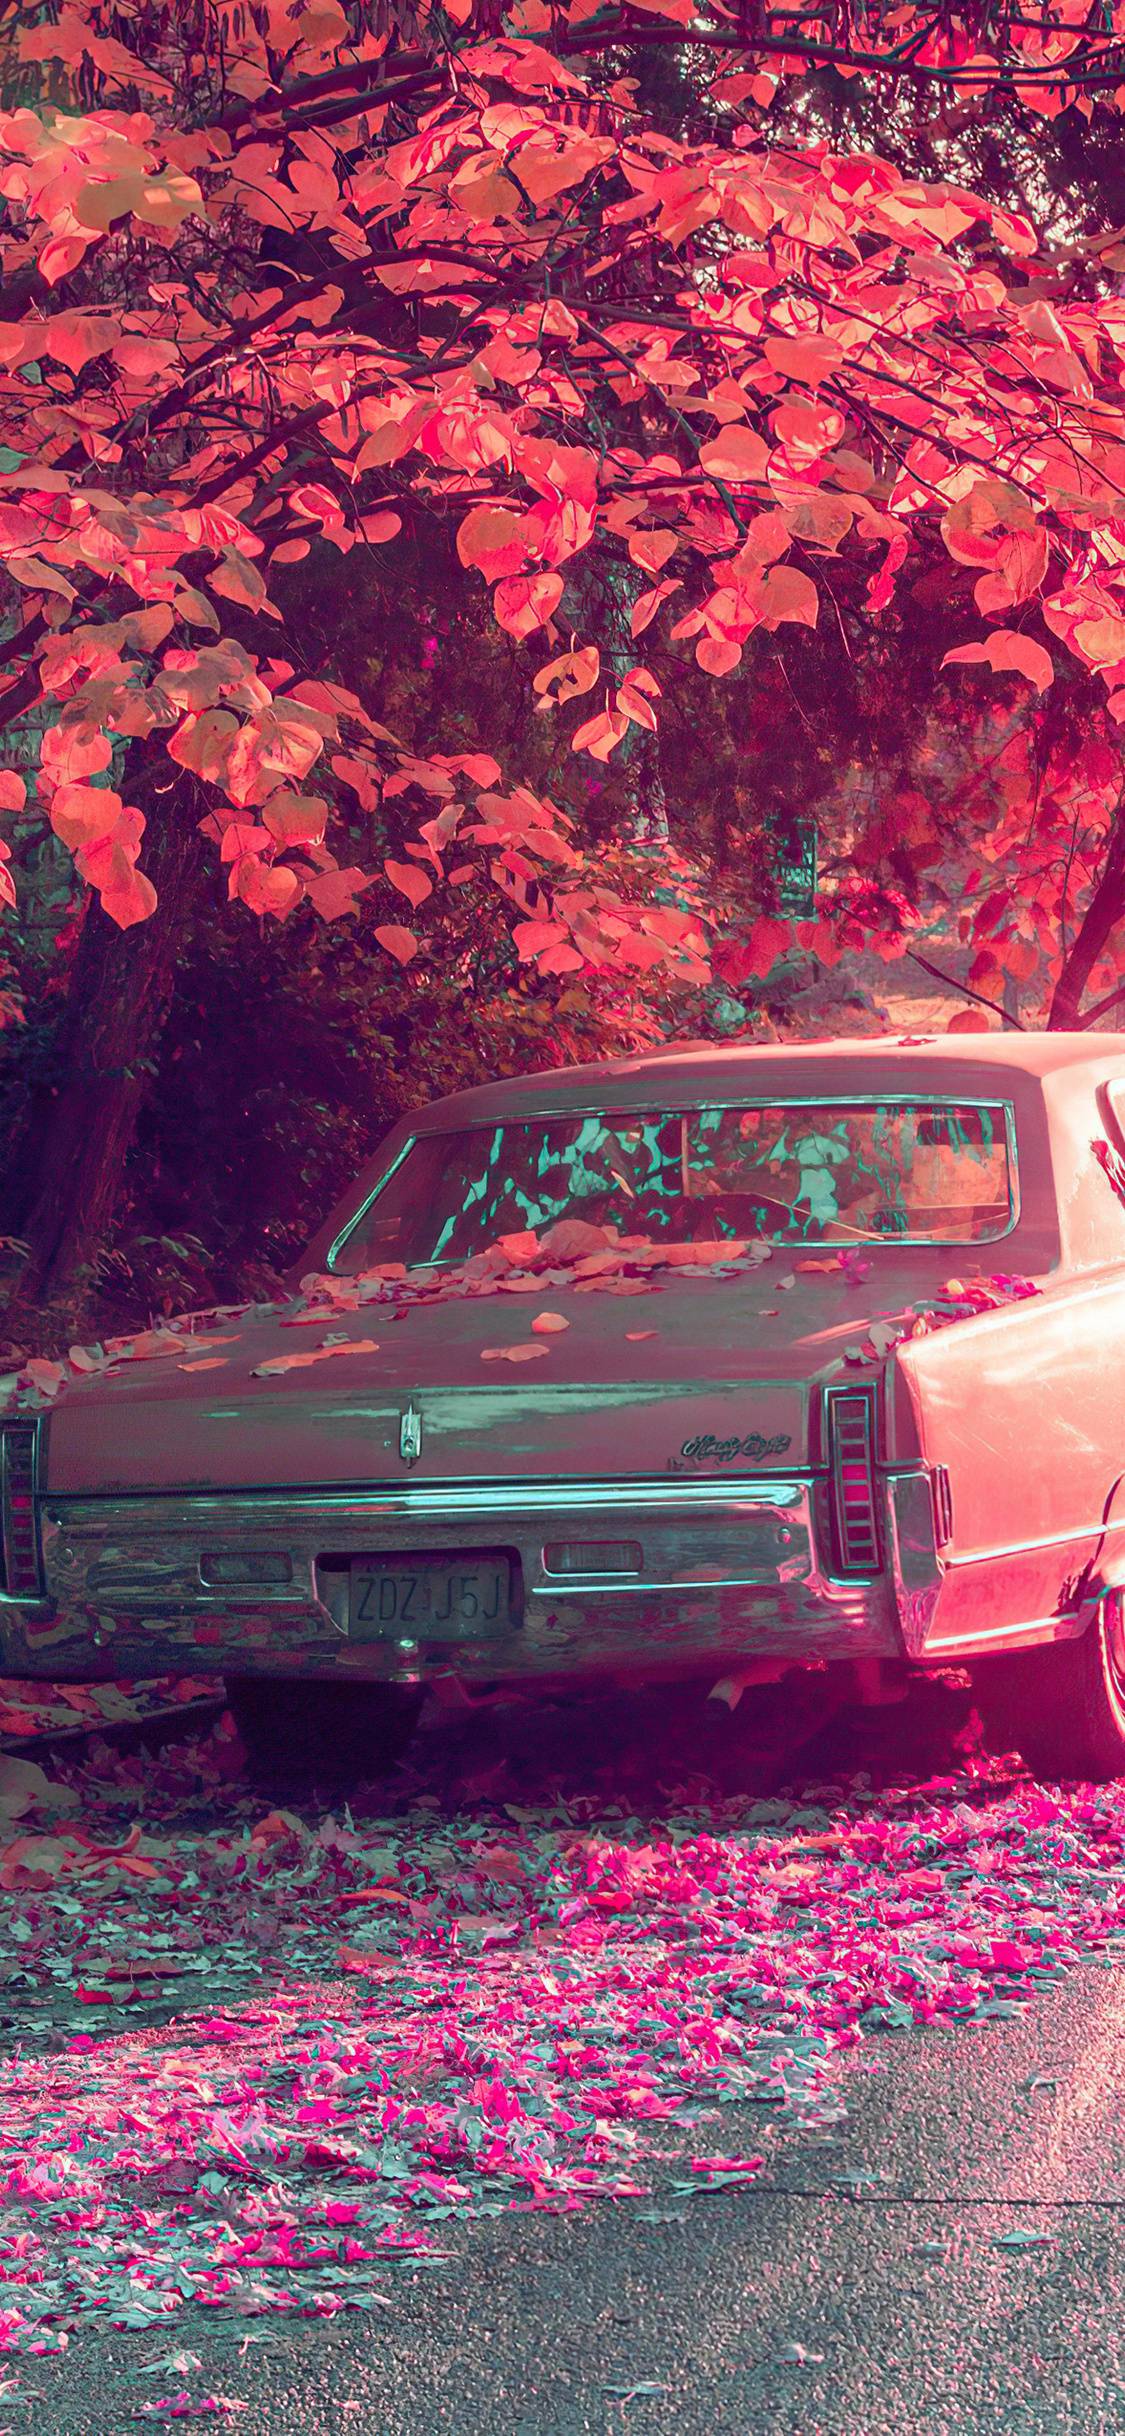 Old car under the tree with pink flowers - Vintage fall